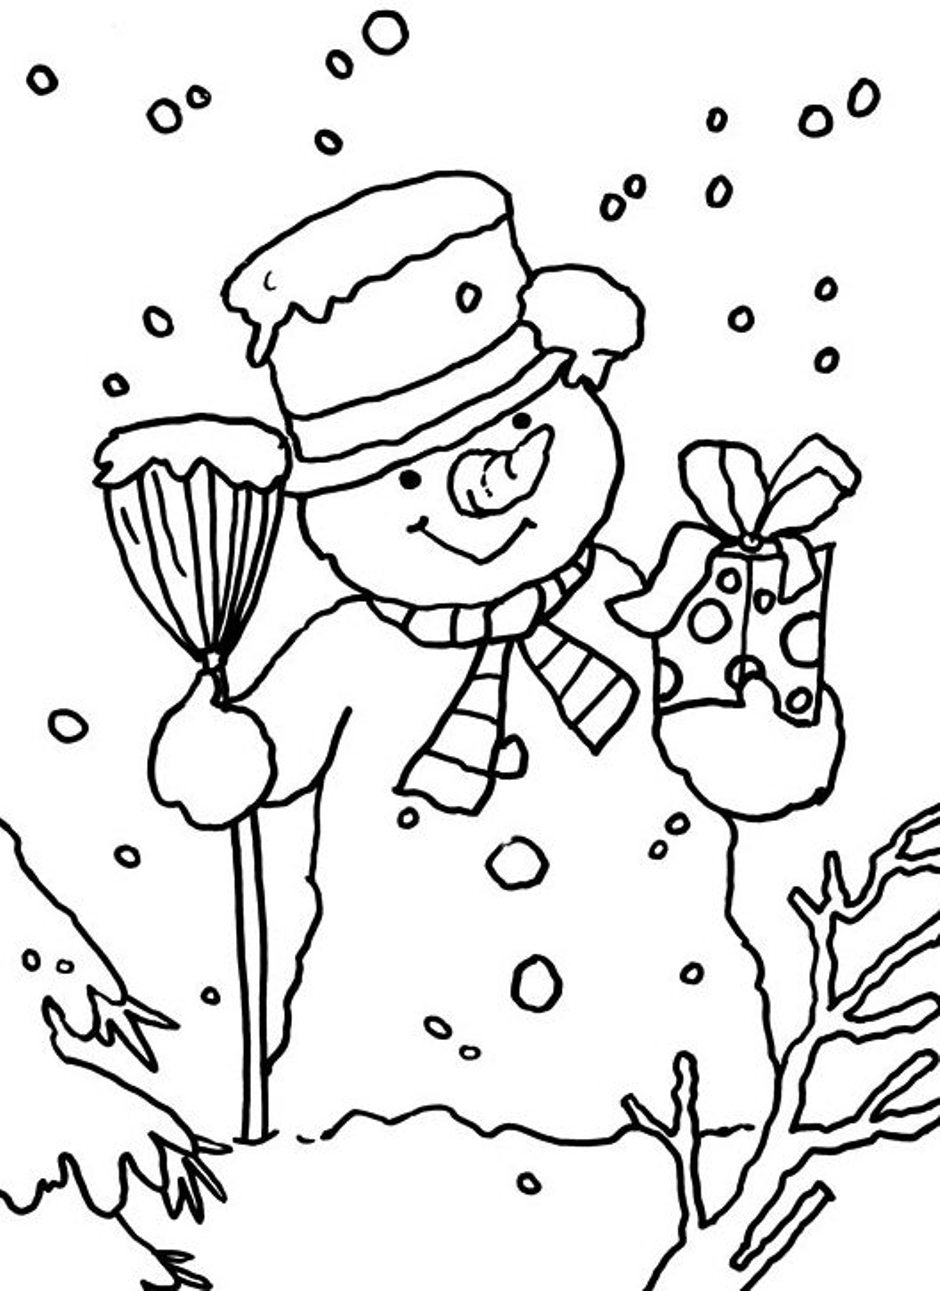 Printable  Funny Winter Snowman Coloring Page